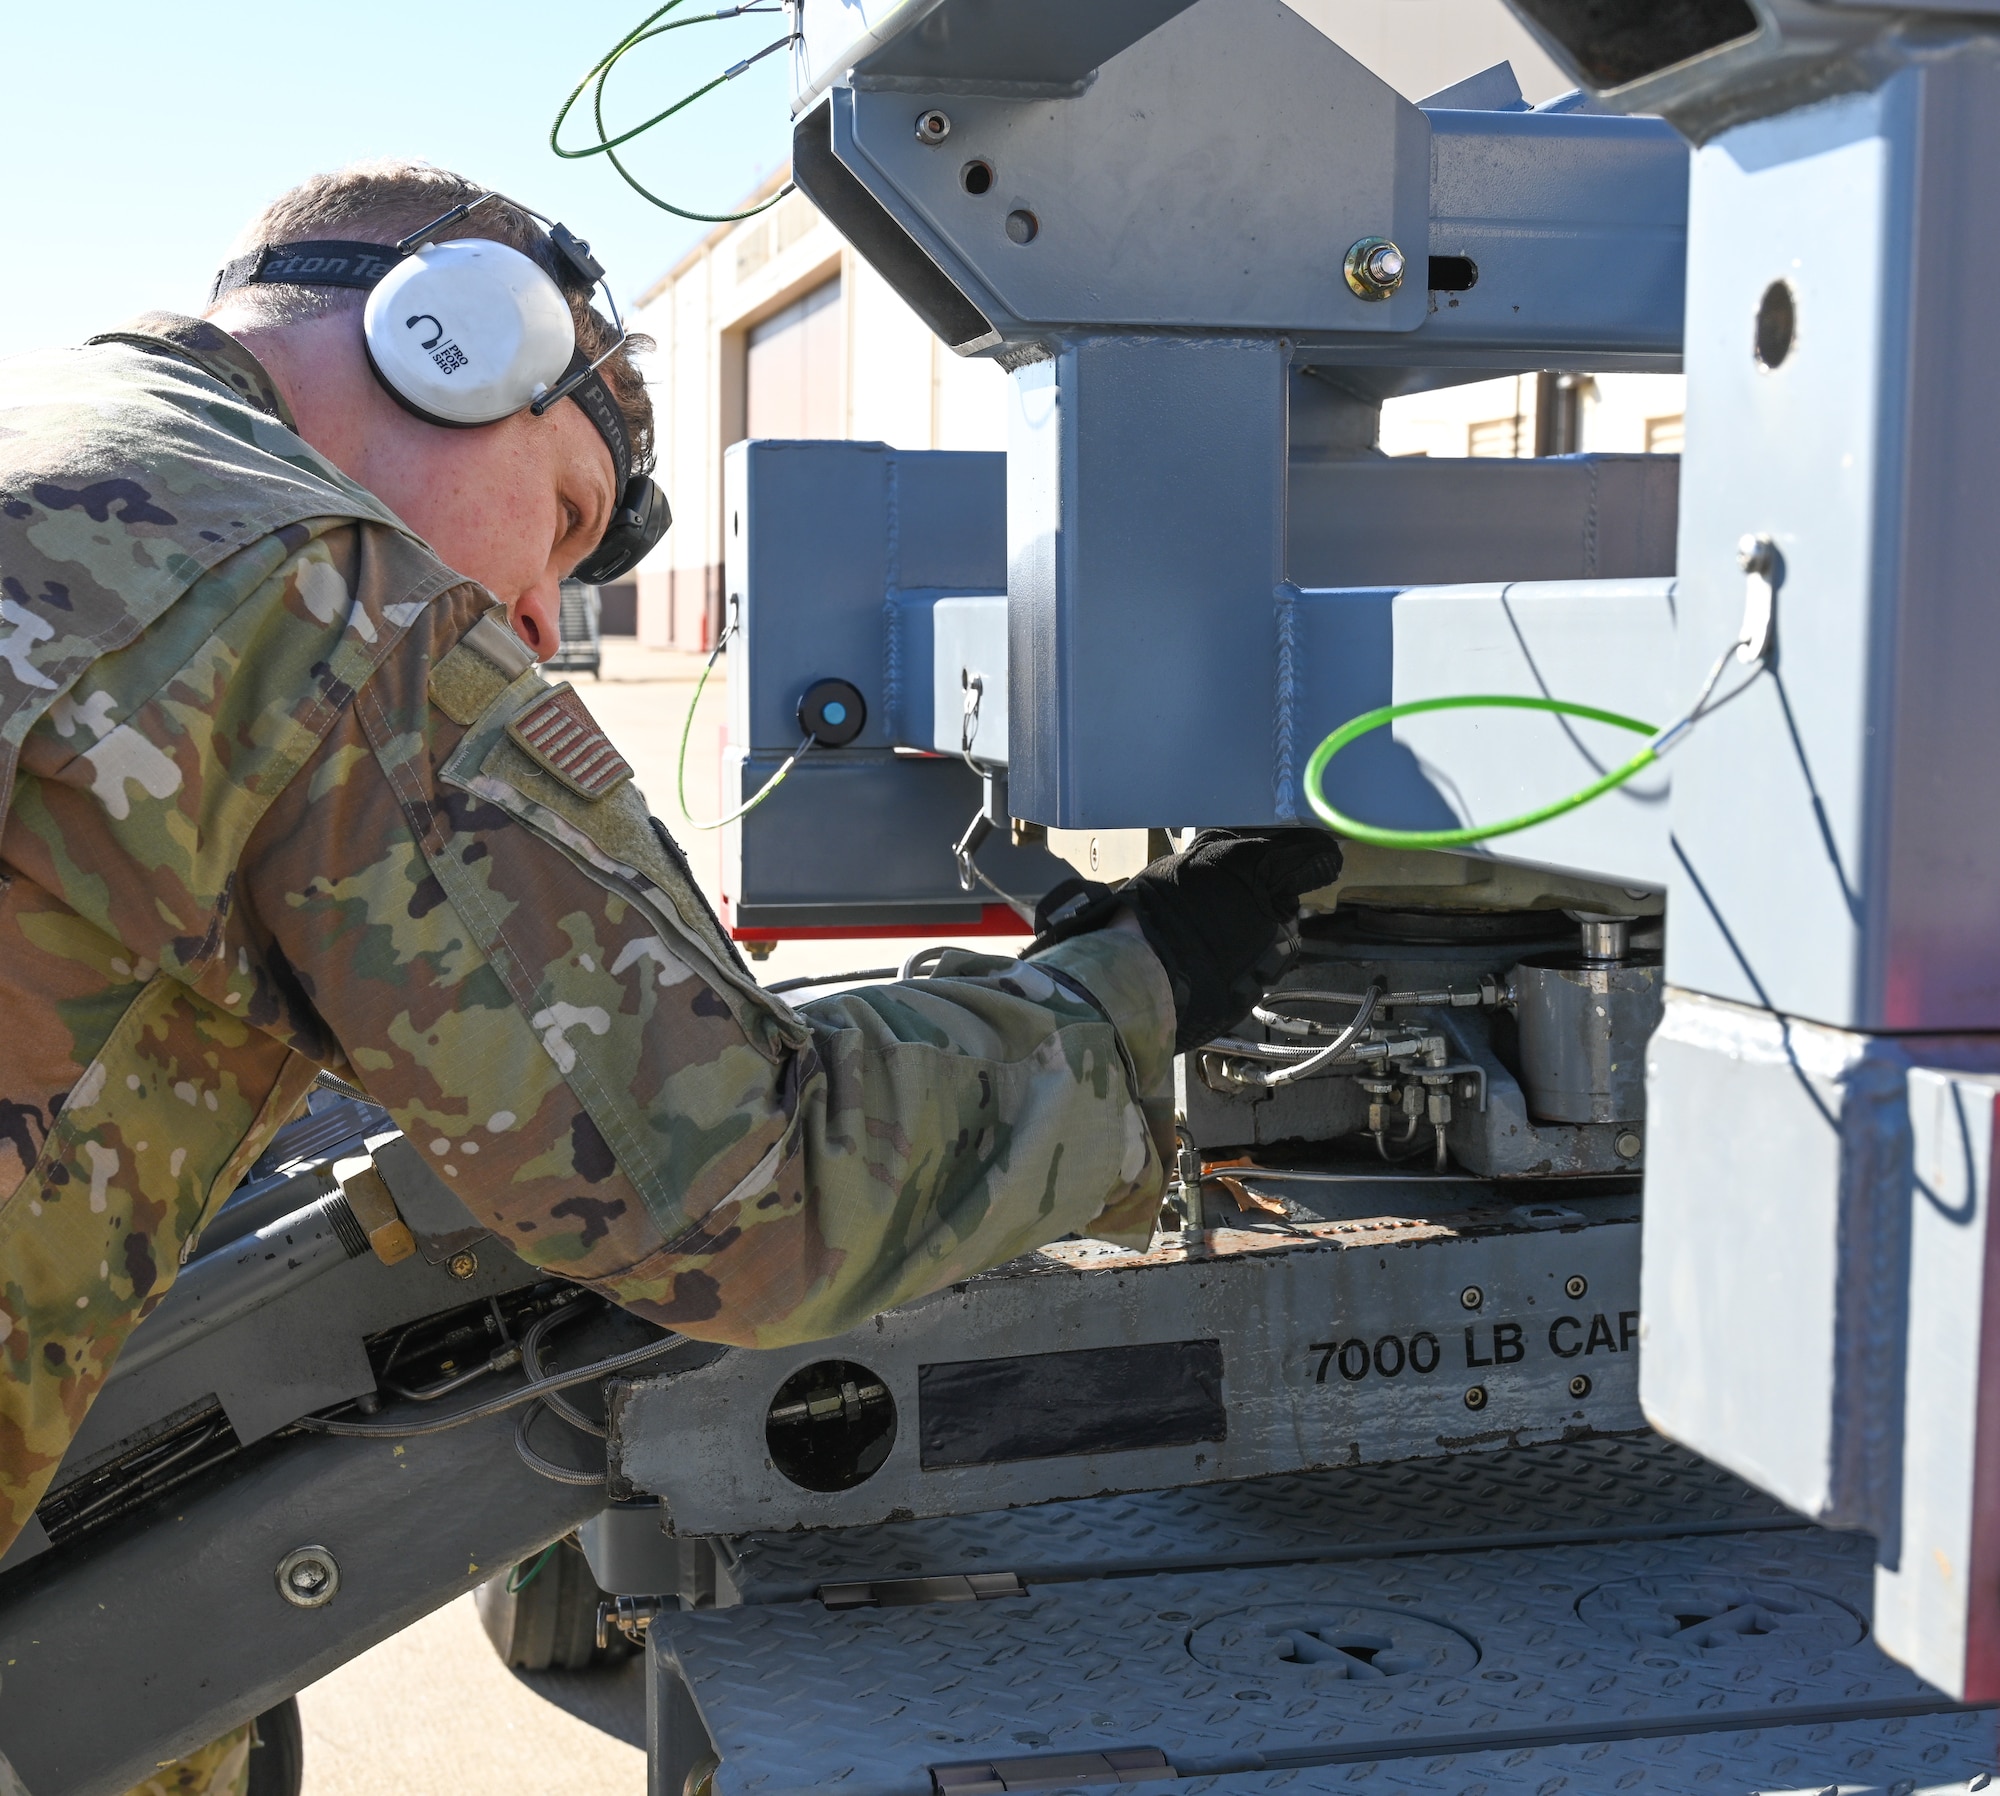 Senior Airman Jesse Papenhausen, 509th Aircraft Maintenance Squadron, weapons load crew member, participated in training on the new launcher load system at Whiteman Air Force Base, Missouri, Feb. 2, 2023. The airman connect the launcher load system adaptor to the jammer. (U.S. Air Force photo by Airman 1st Class Hailey Farrell)